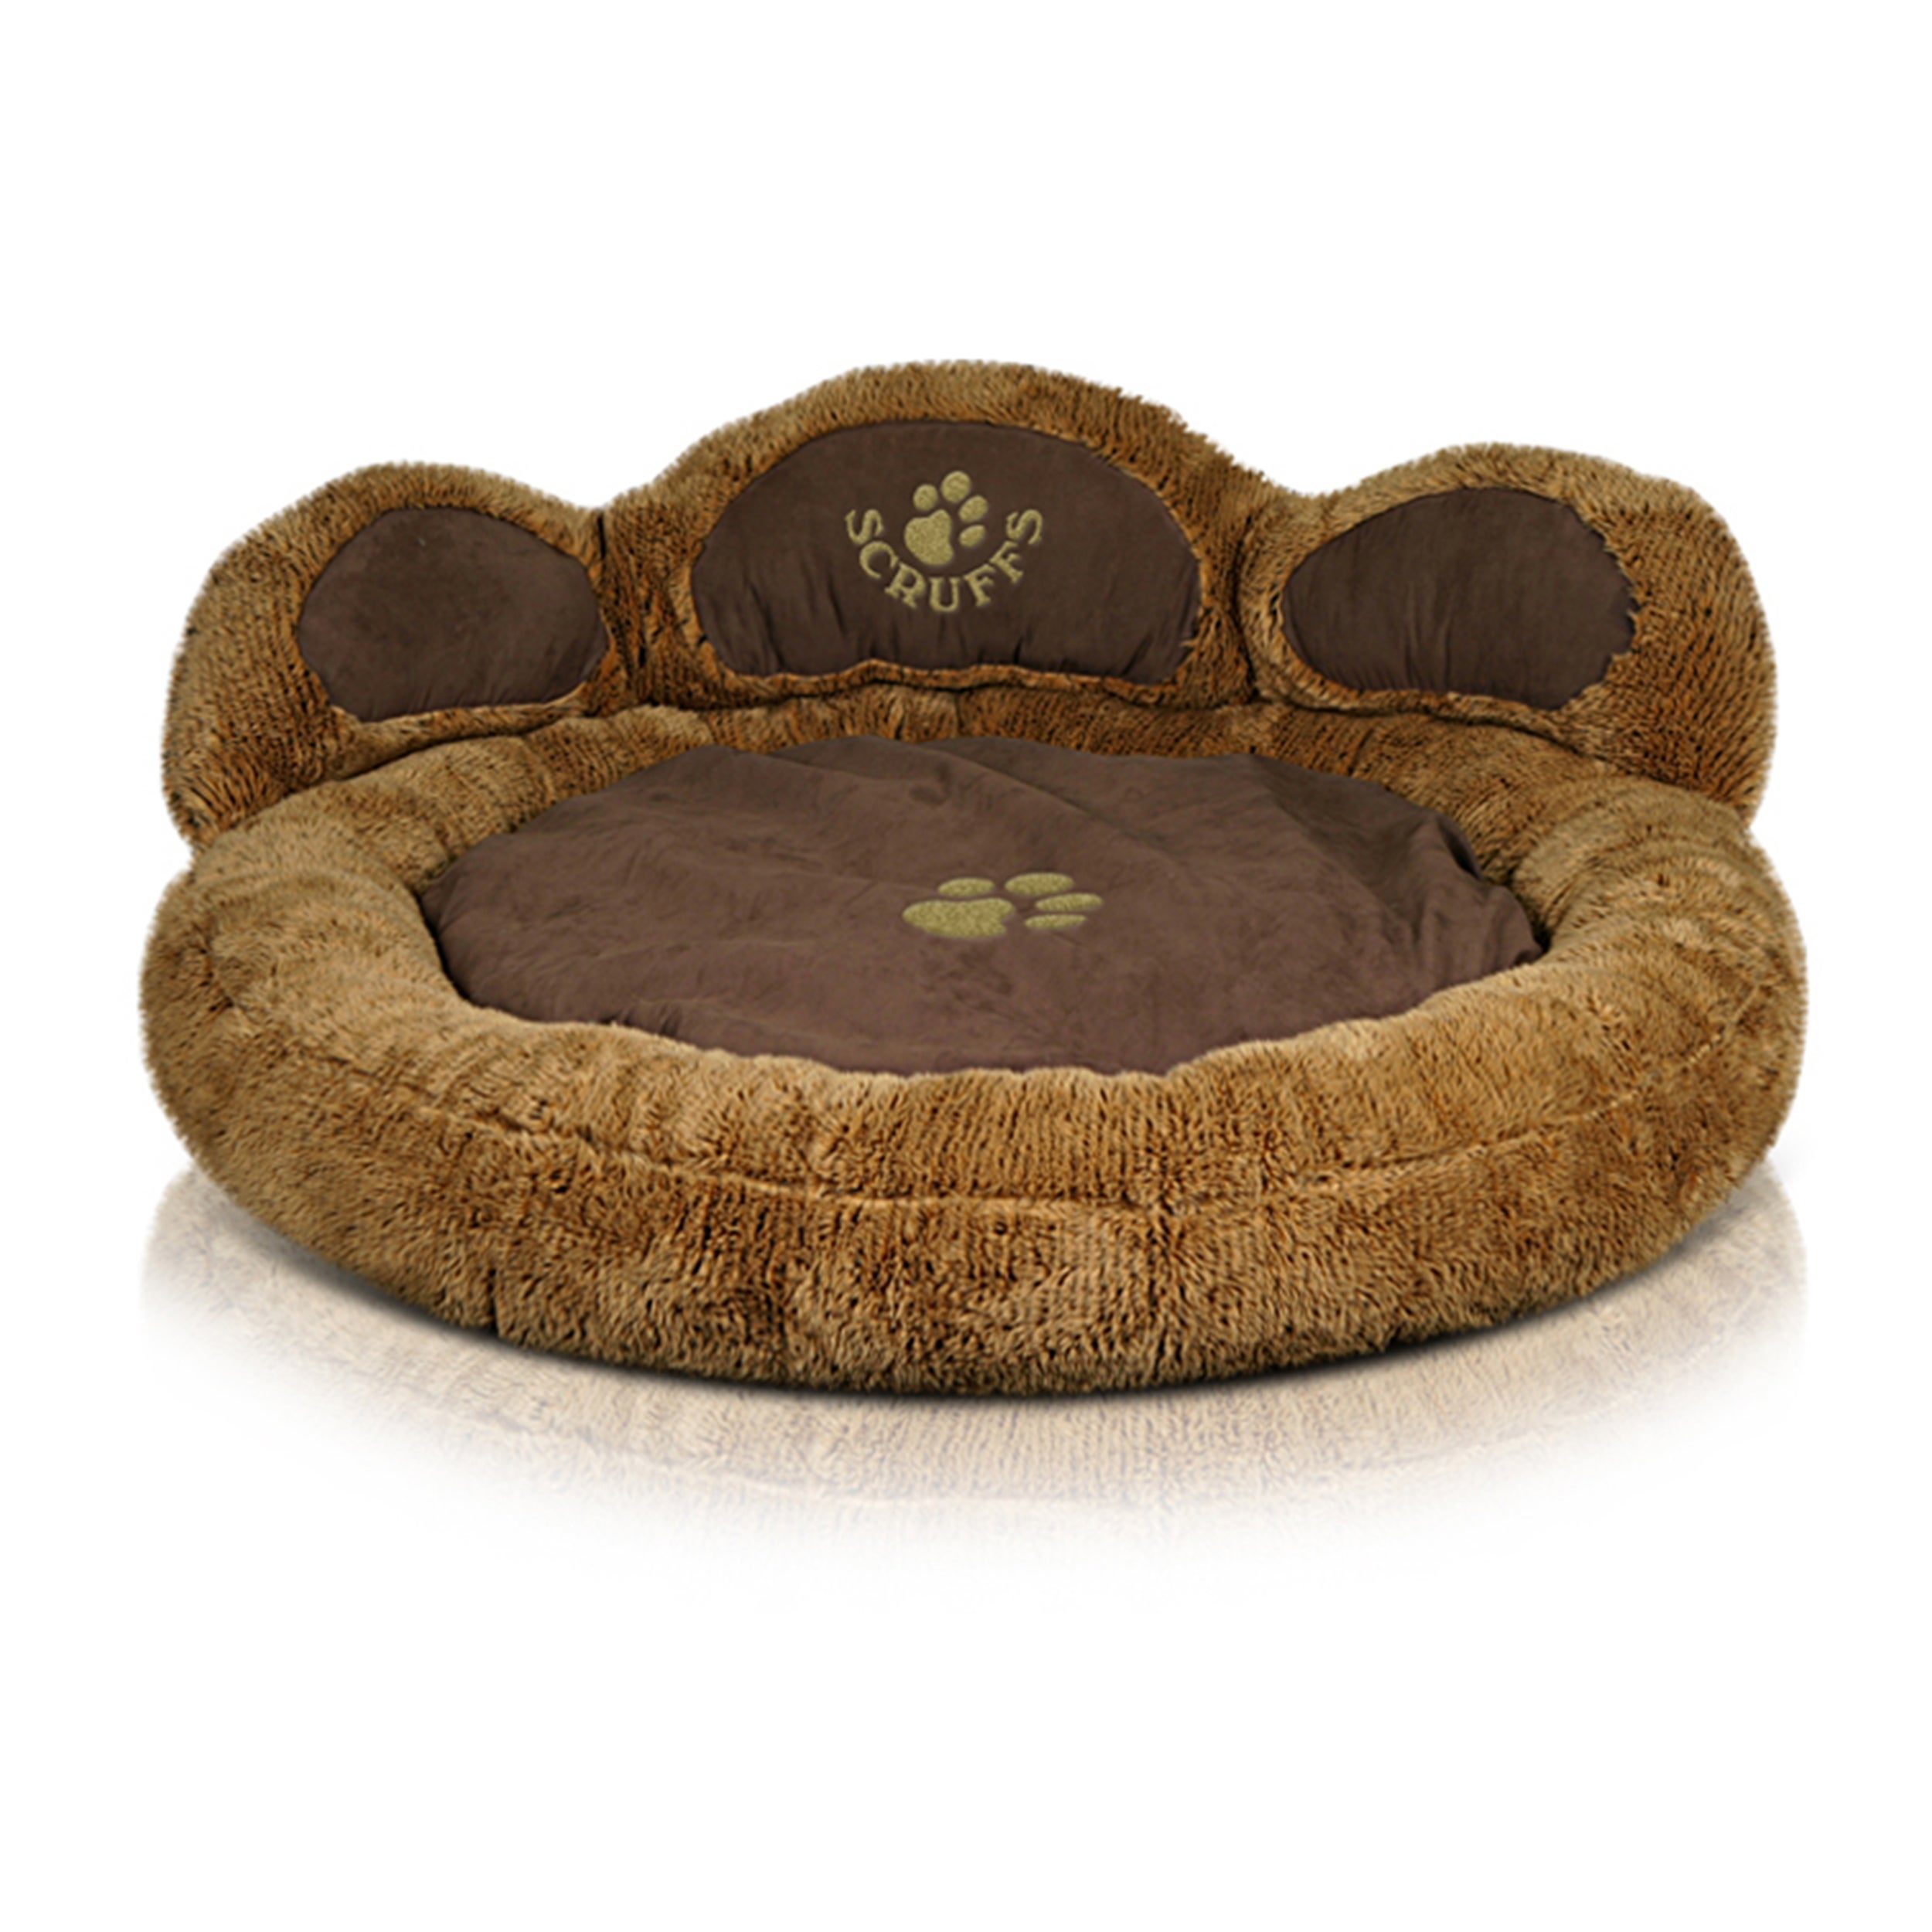 Scruffs Grizzly Bear Dog Bed Brown